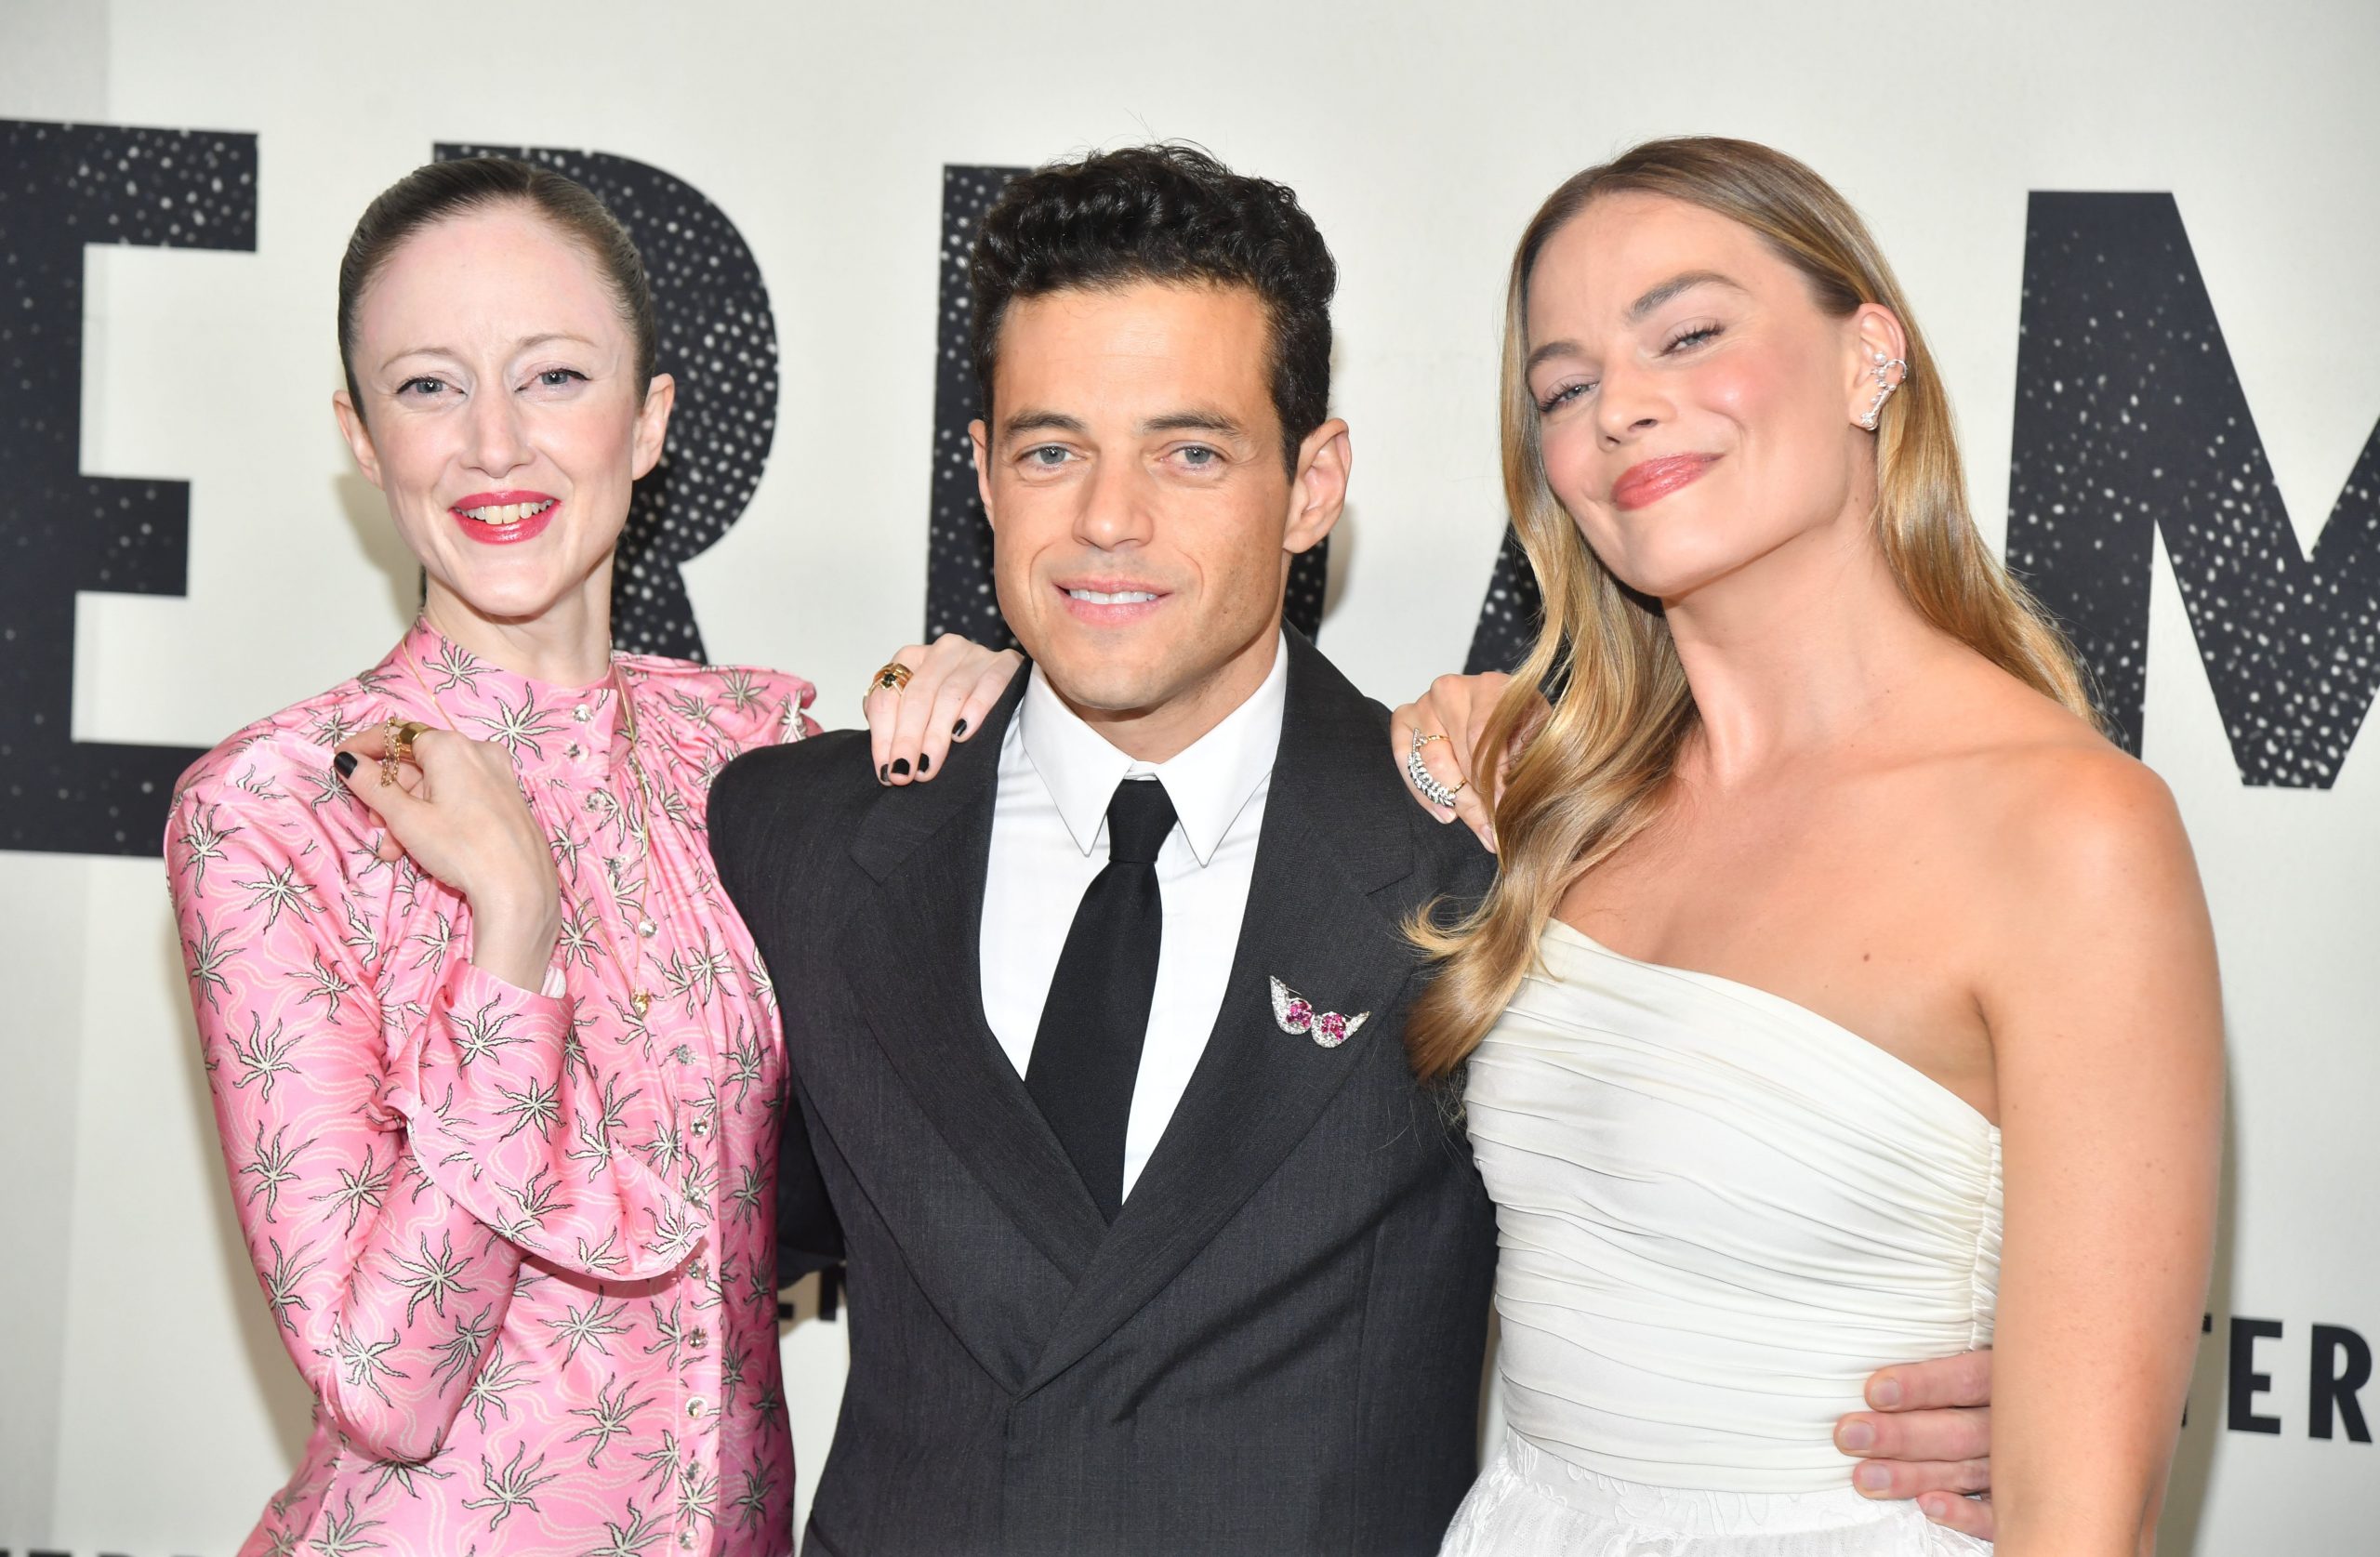 (L-R) Andrea Riseborough, Rami Malek, and Margot Robbie attend the 'Amsterdam' World Premiere at Alice Tully Hall on September 18, 2022 in New York City.